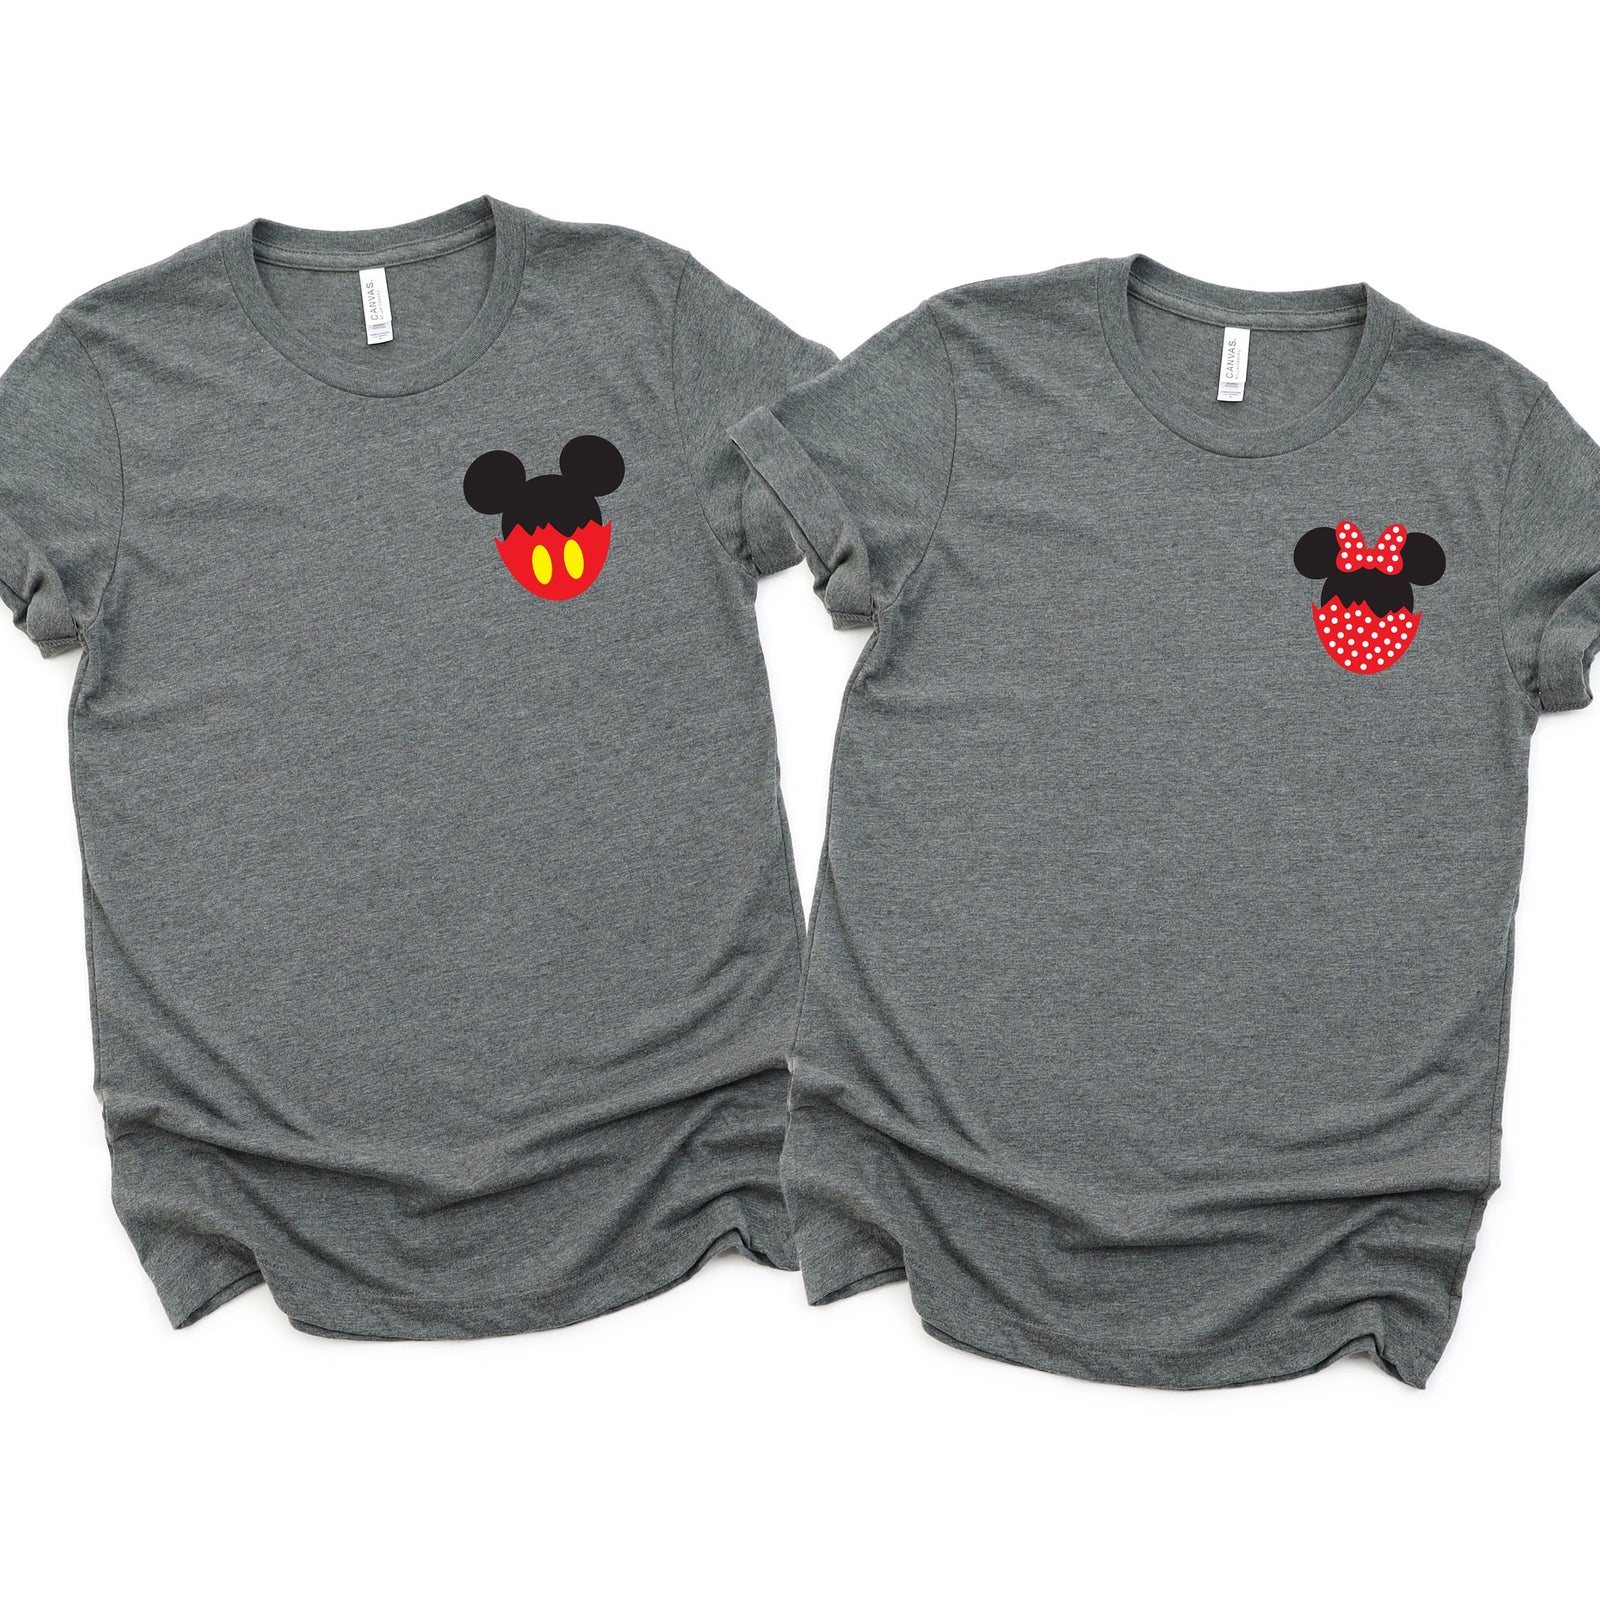 Happy Easter Minnie and Mickey Shirts - Disney Couples - Disney Matching Shirts - Easter Eggs Hatched Pocket Size Logo